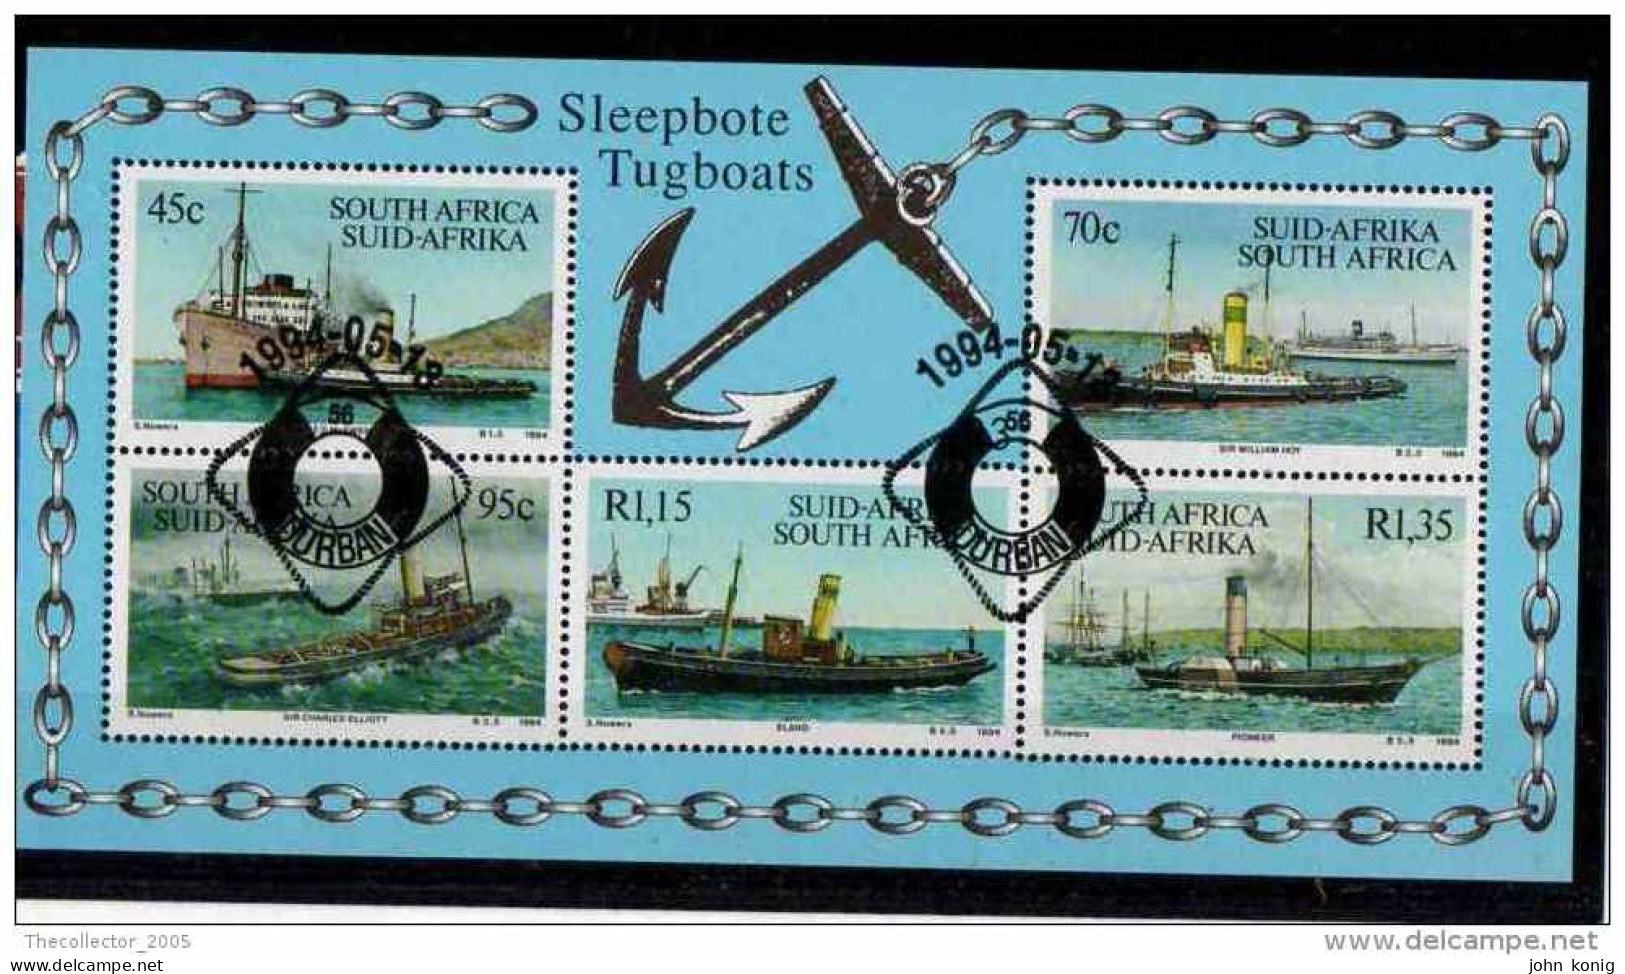 FOGLIETTO-STAMPS SHEET - SUD AFRICA-SOUTH AFRICA-SUID AFRIKA - NAVI A VAPORE - SLEEPBOTE TUGBOATS (1994) - Hojas Bloque